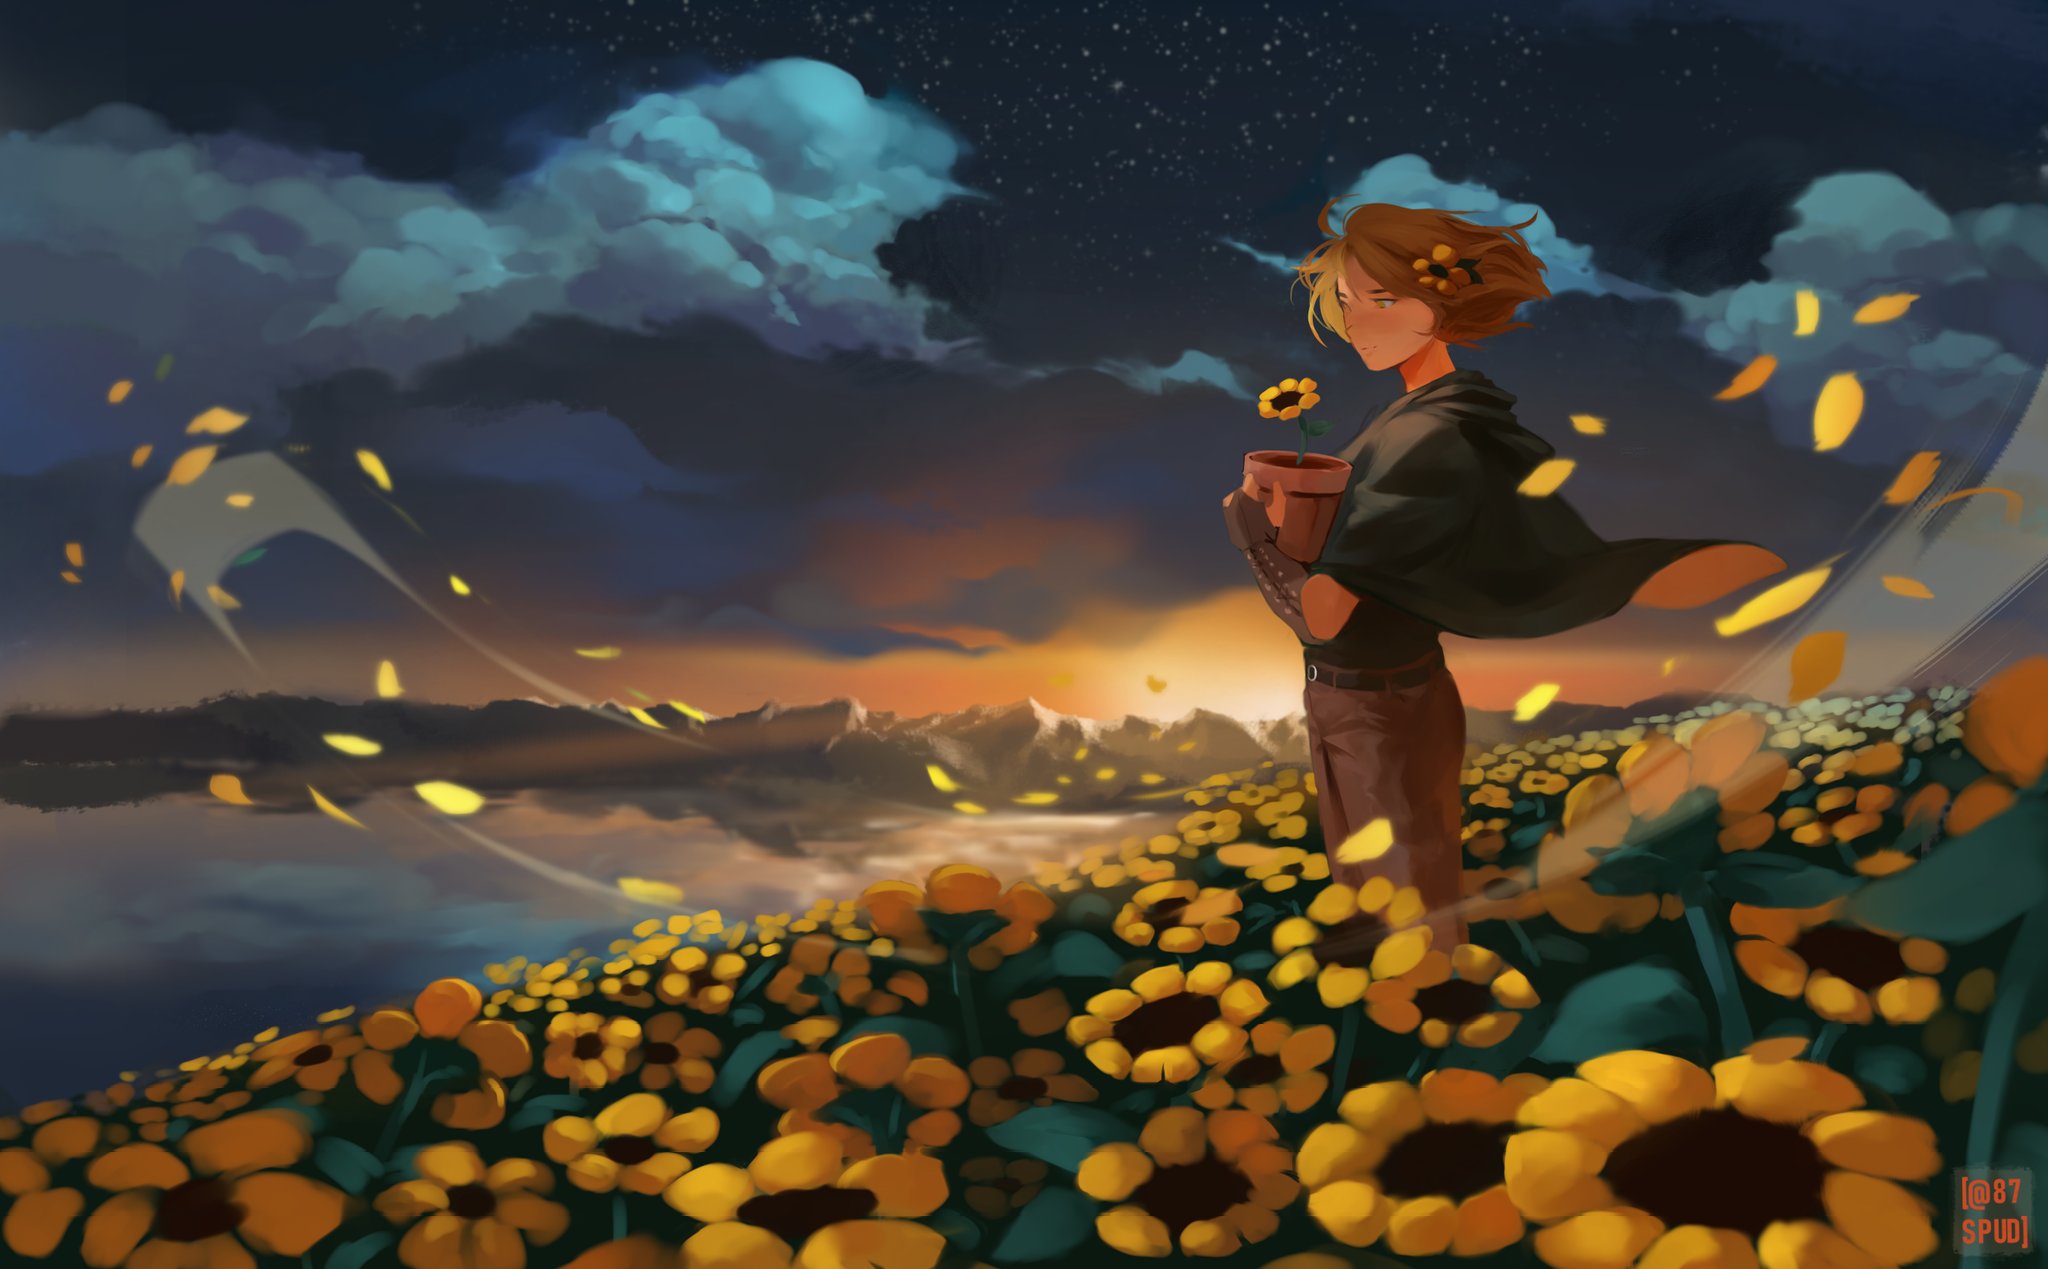 The Little Prince 4K Wallpapers